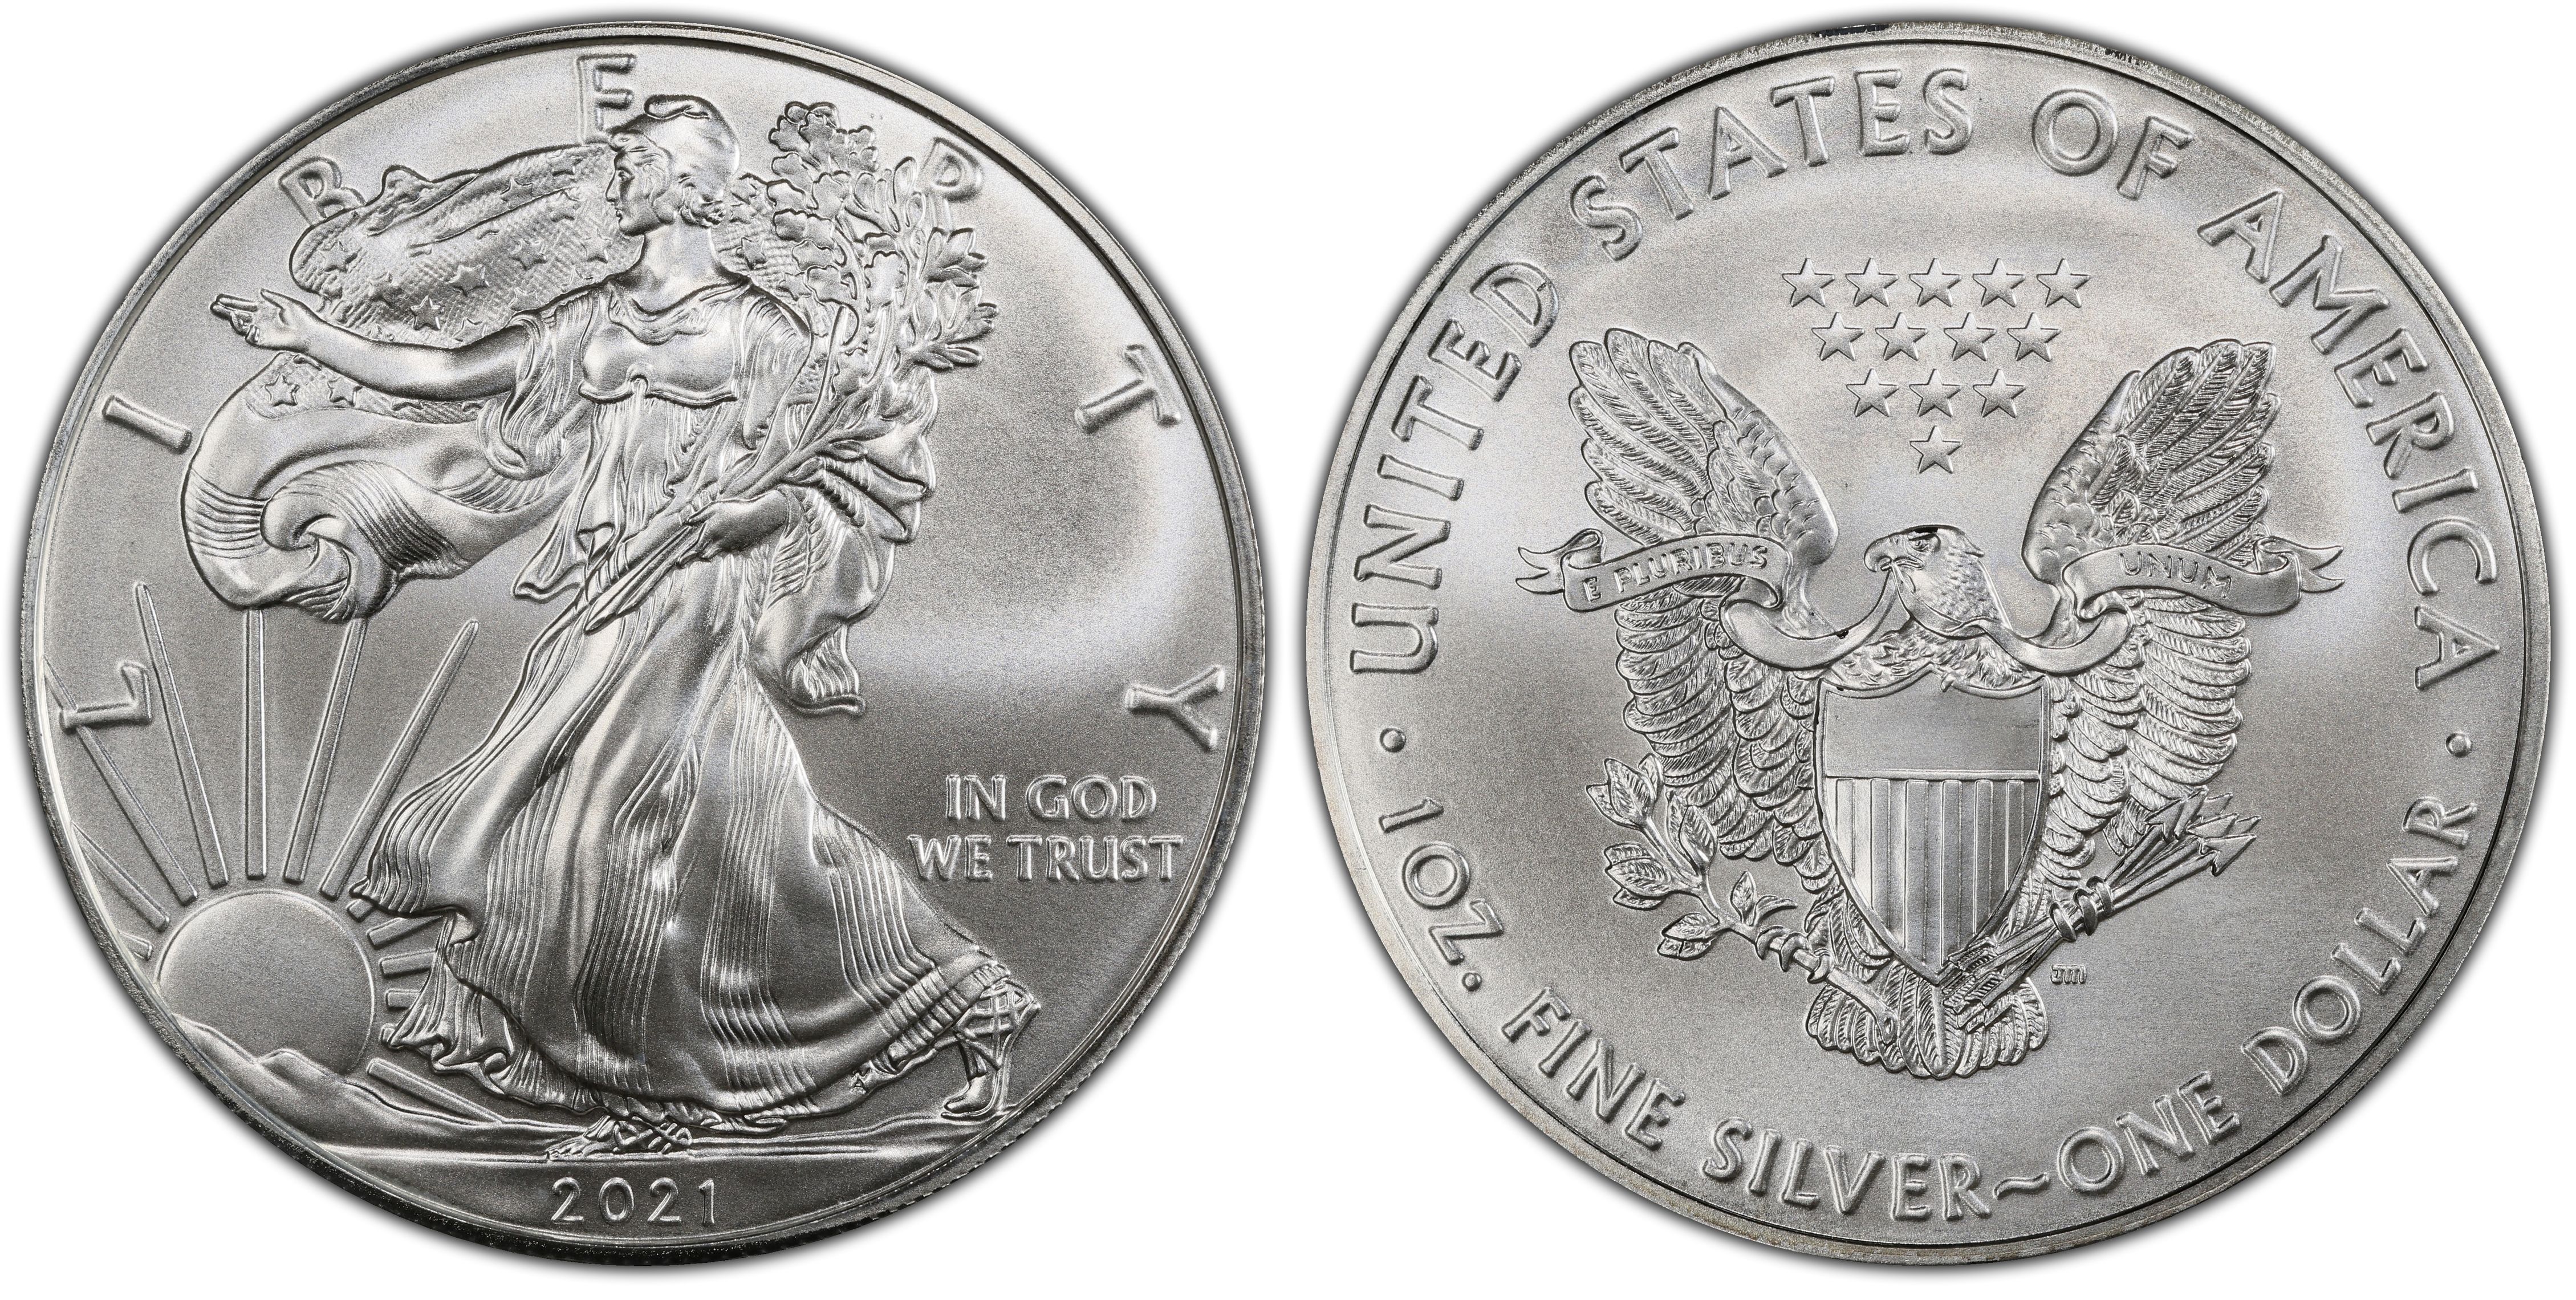 2021 $1 Silver Eagle - Type 1 First Day of Issue (Regular Strike